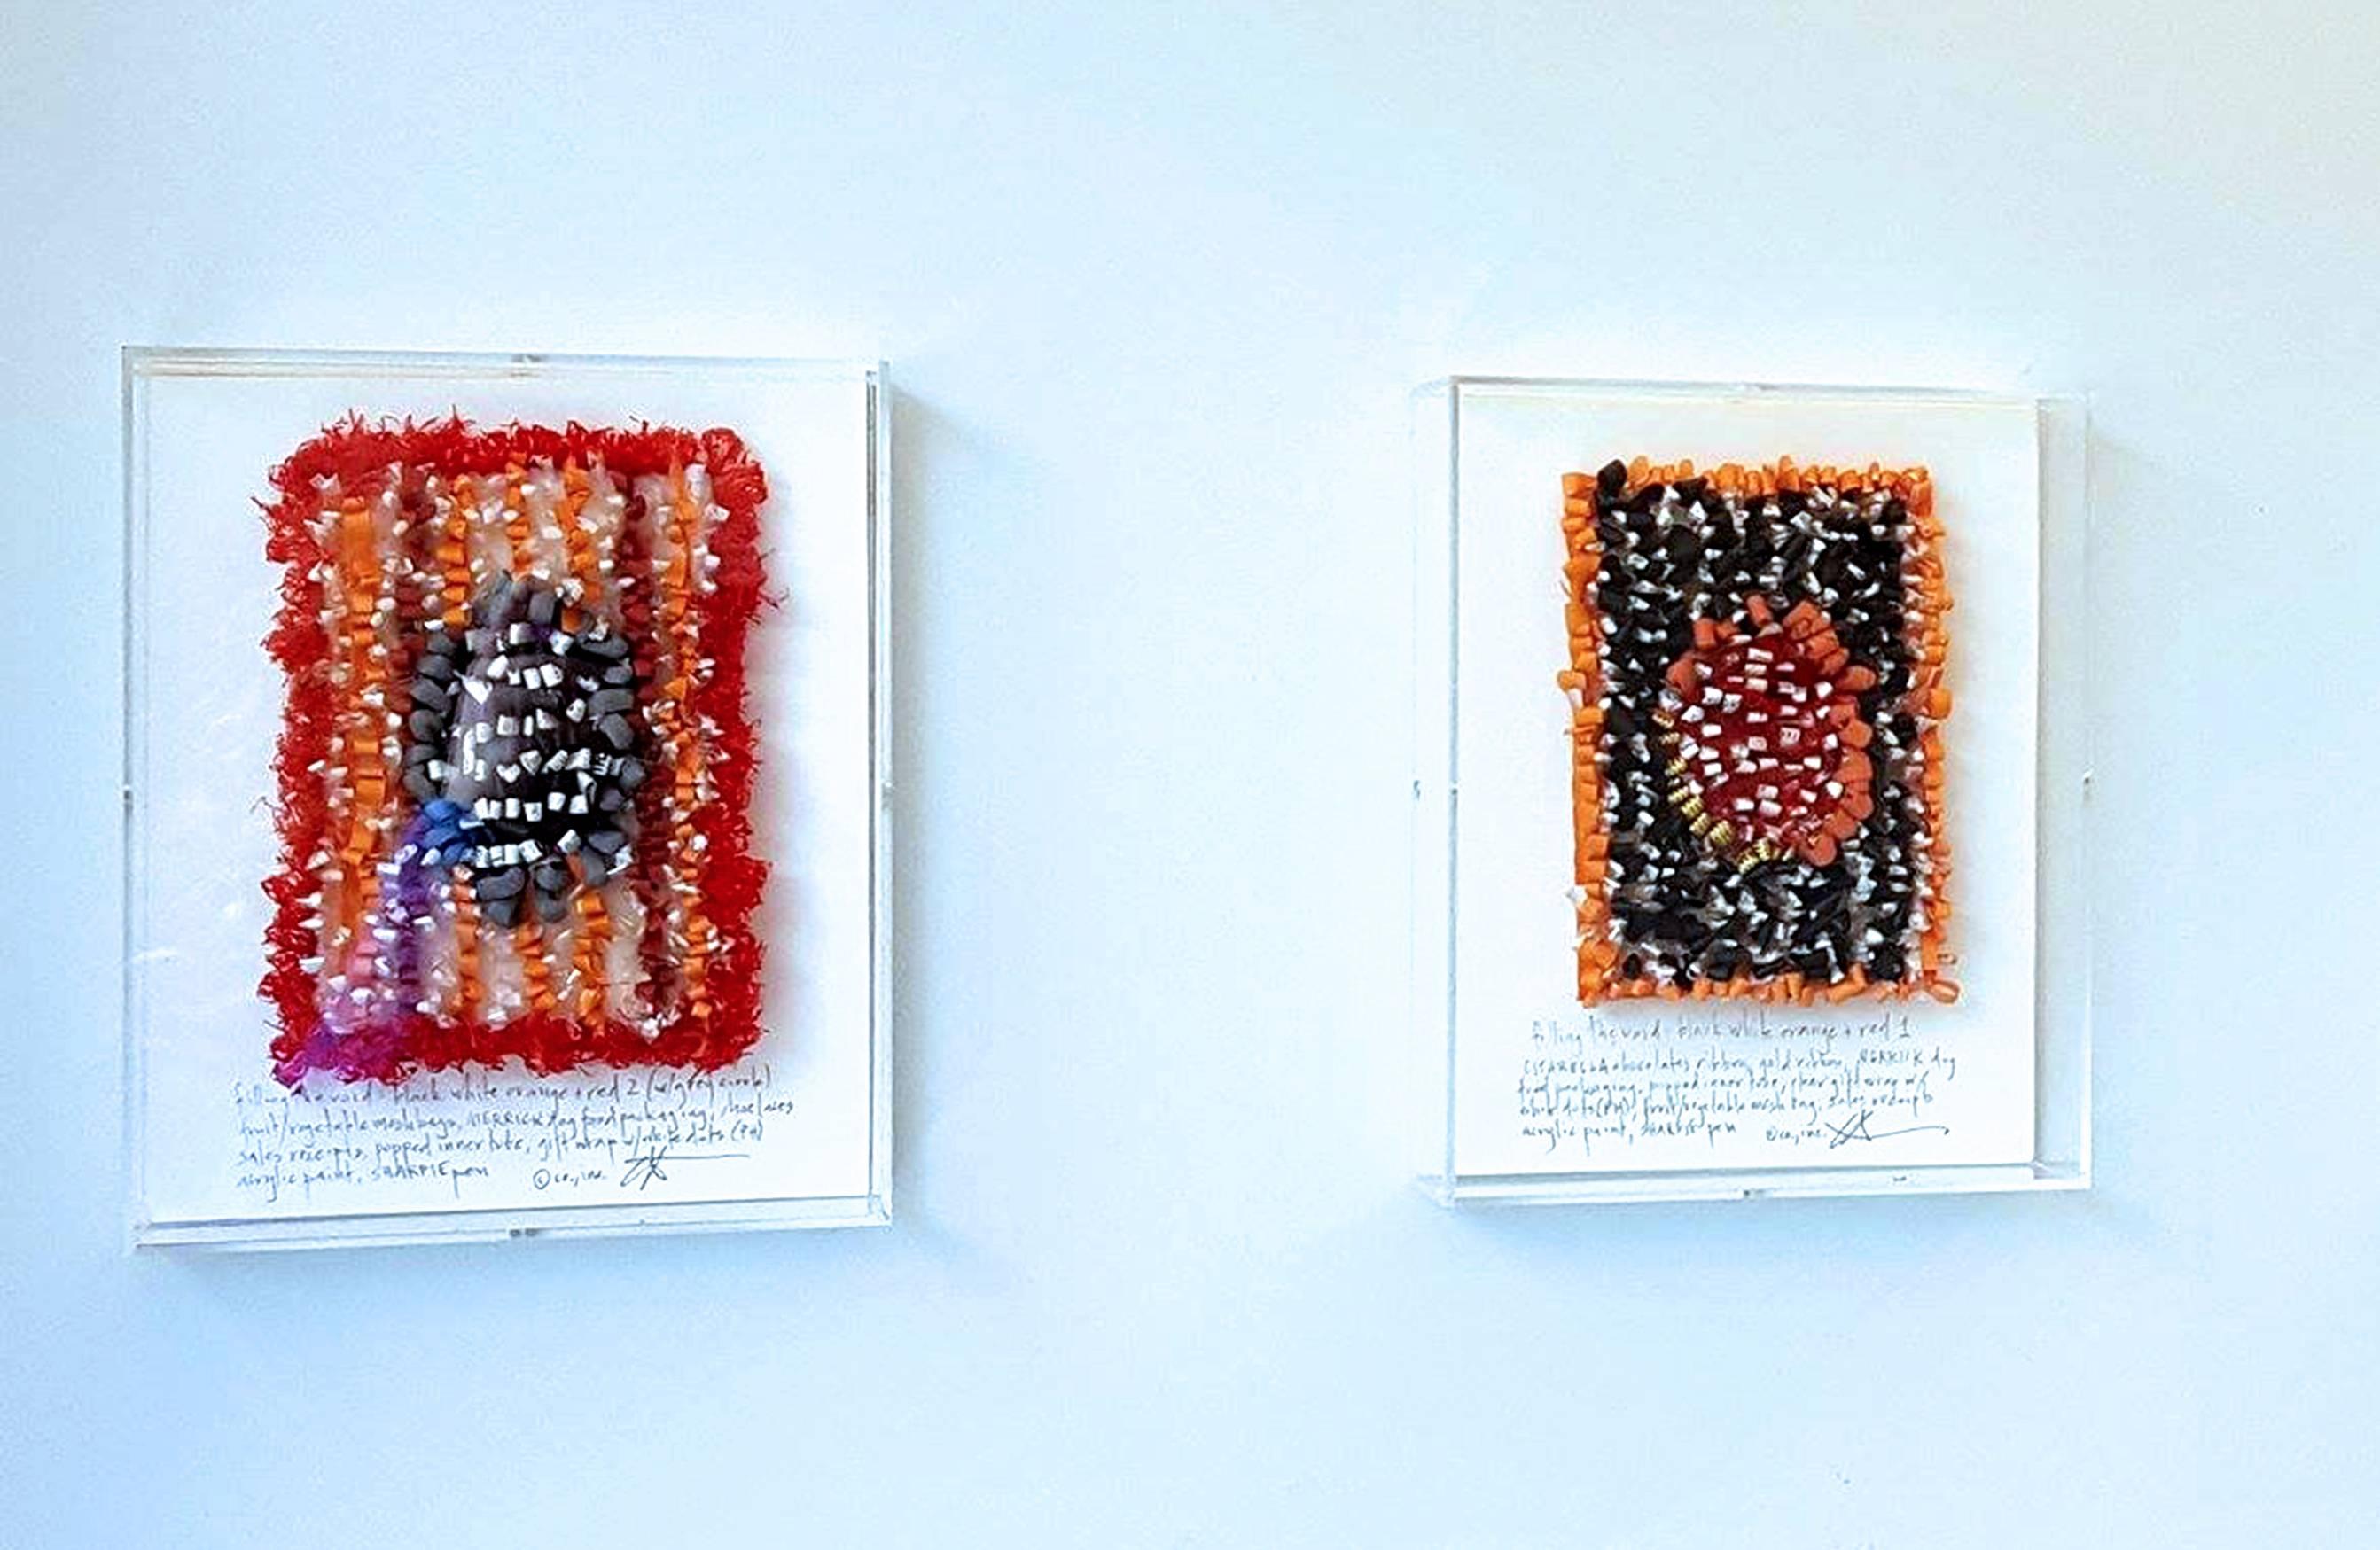 Filling the Void: Black, White, Orange + Red 2 - Abstract Mixed Media Art by Constance Old